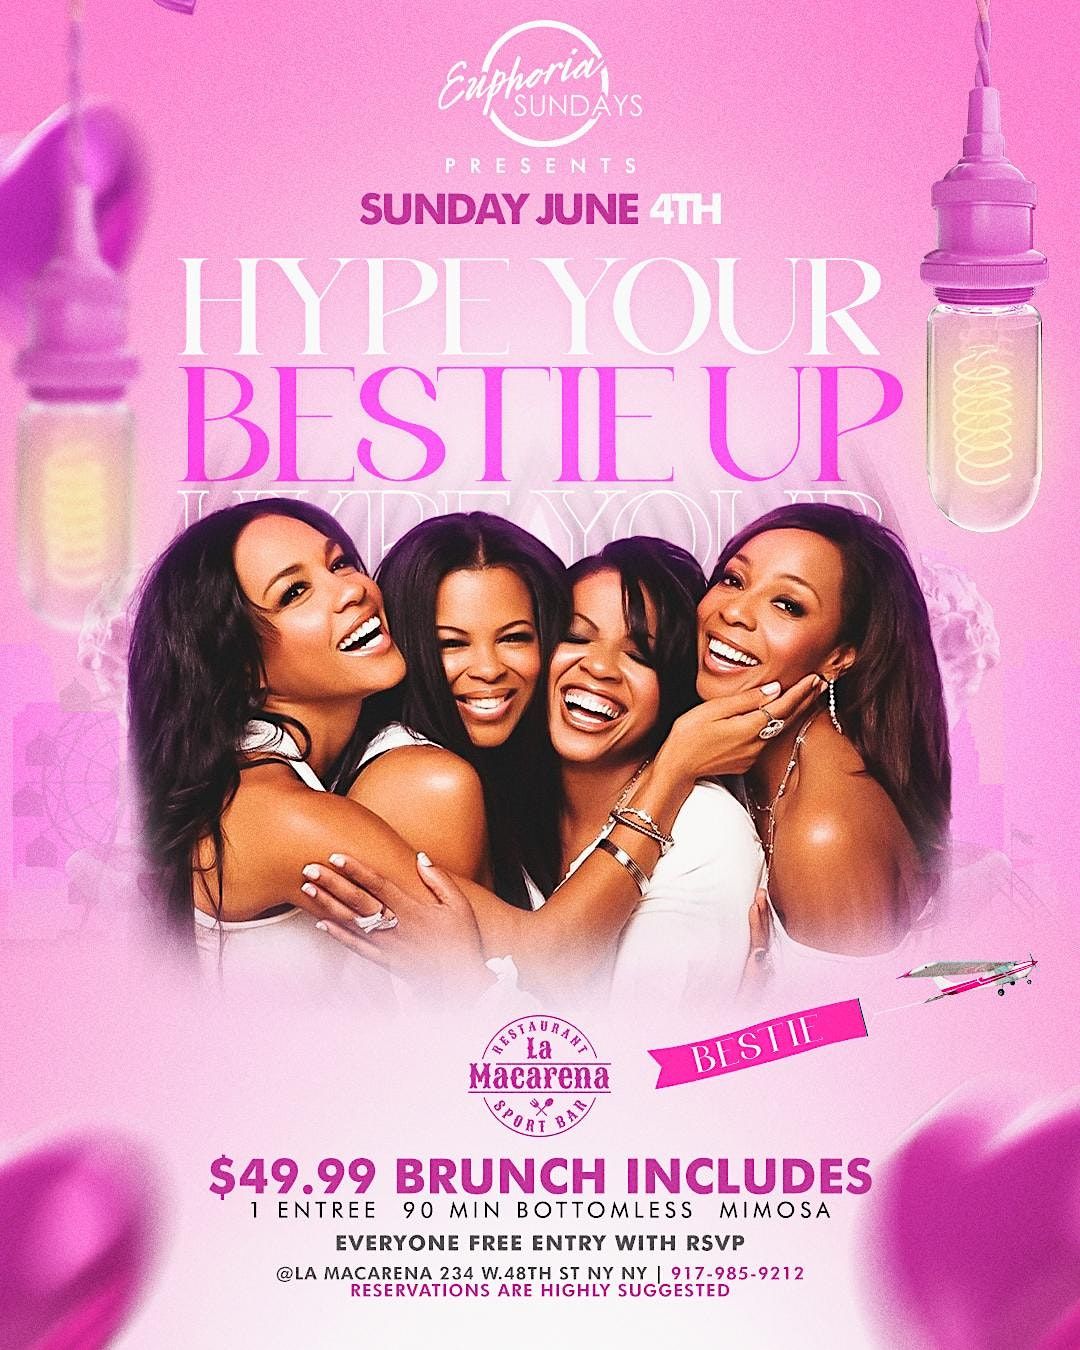 Hype your bestie up brunch & day party #free #party